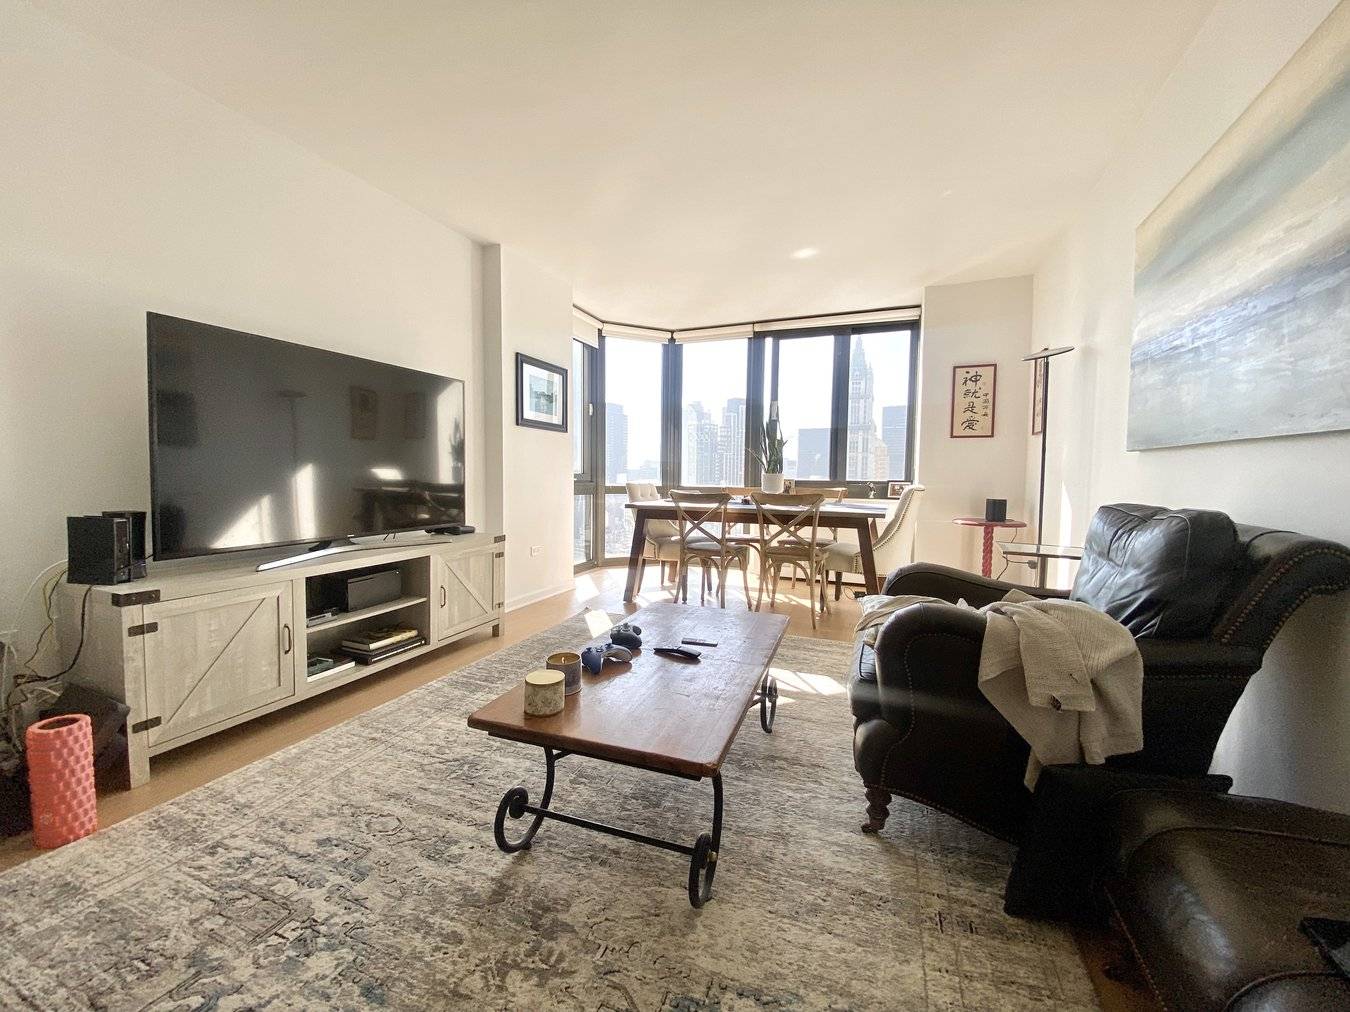 Huge 1 Bedroom, 1 Bathroom apartment with South Facing exposure featuring stunning city and water views, great light, a galley kitchen and great closet space.